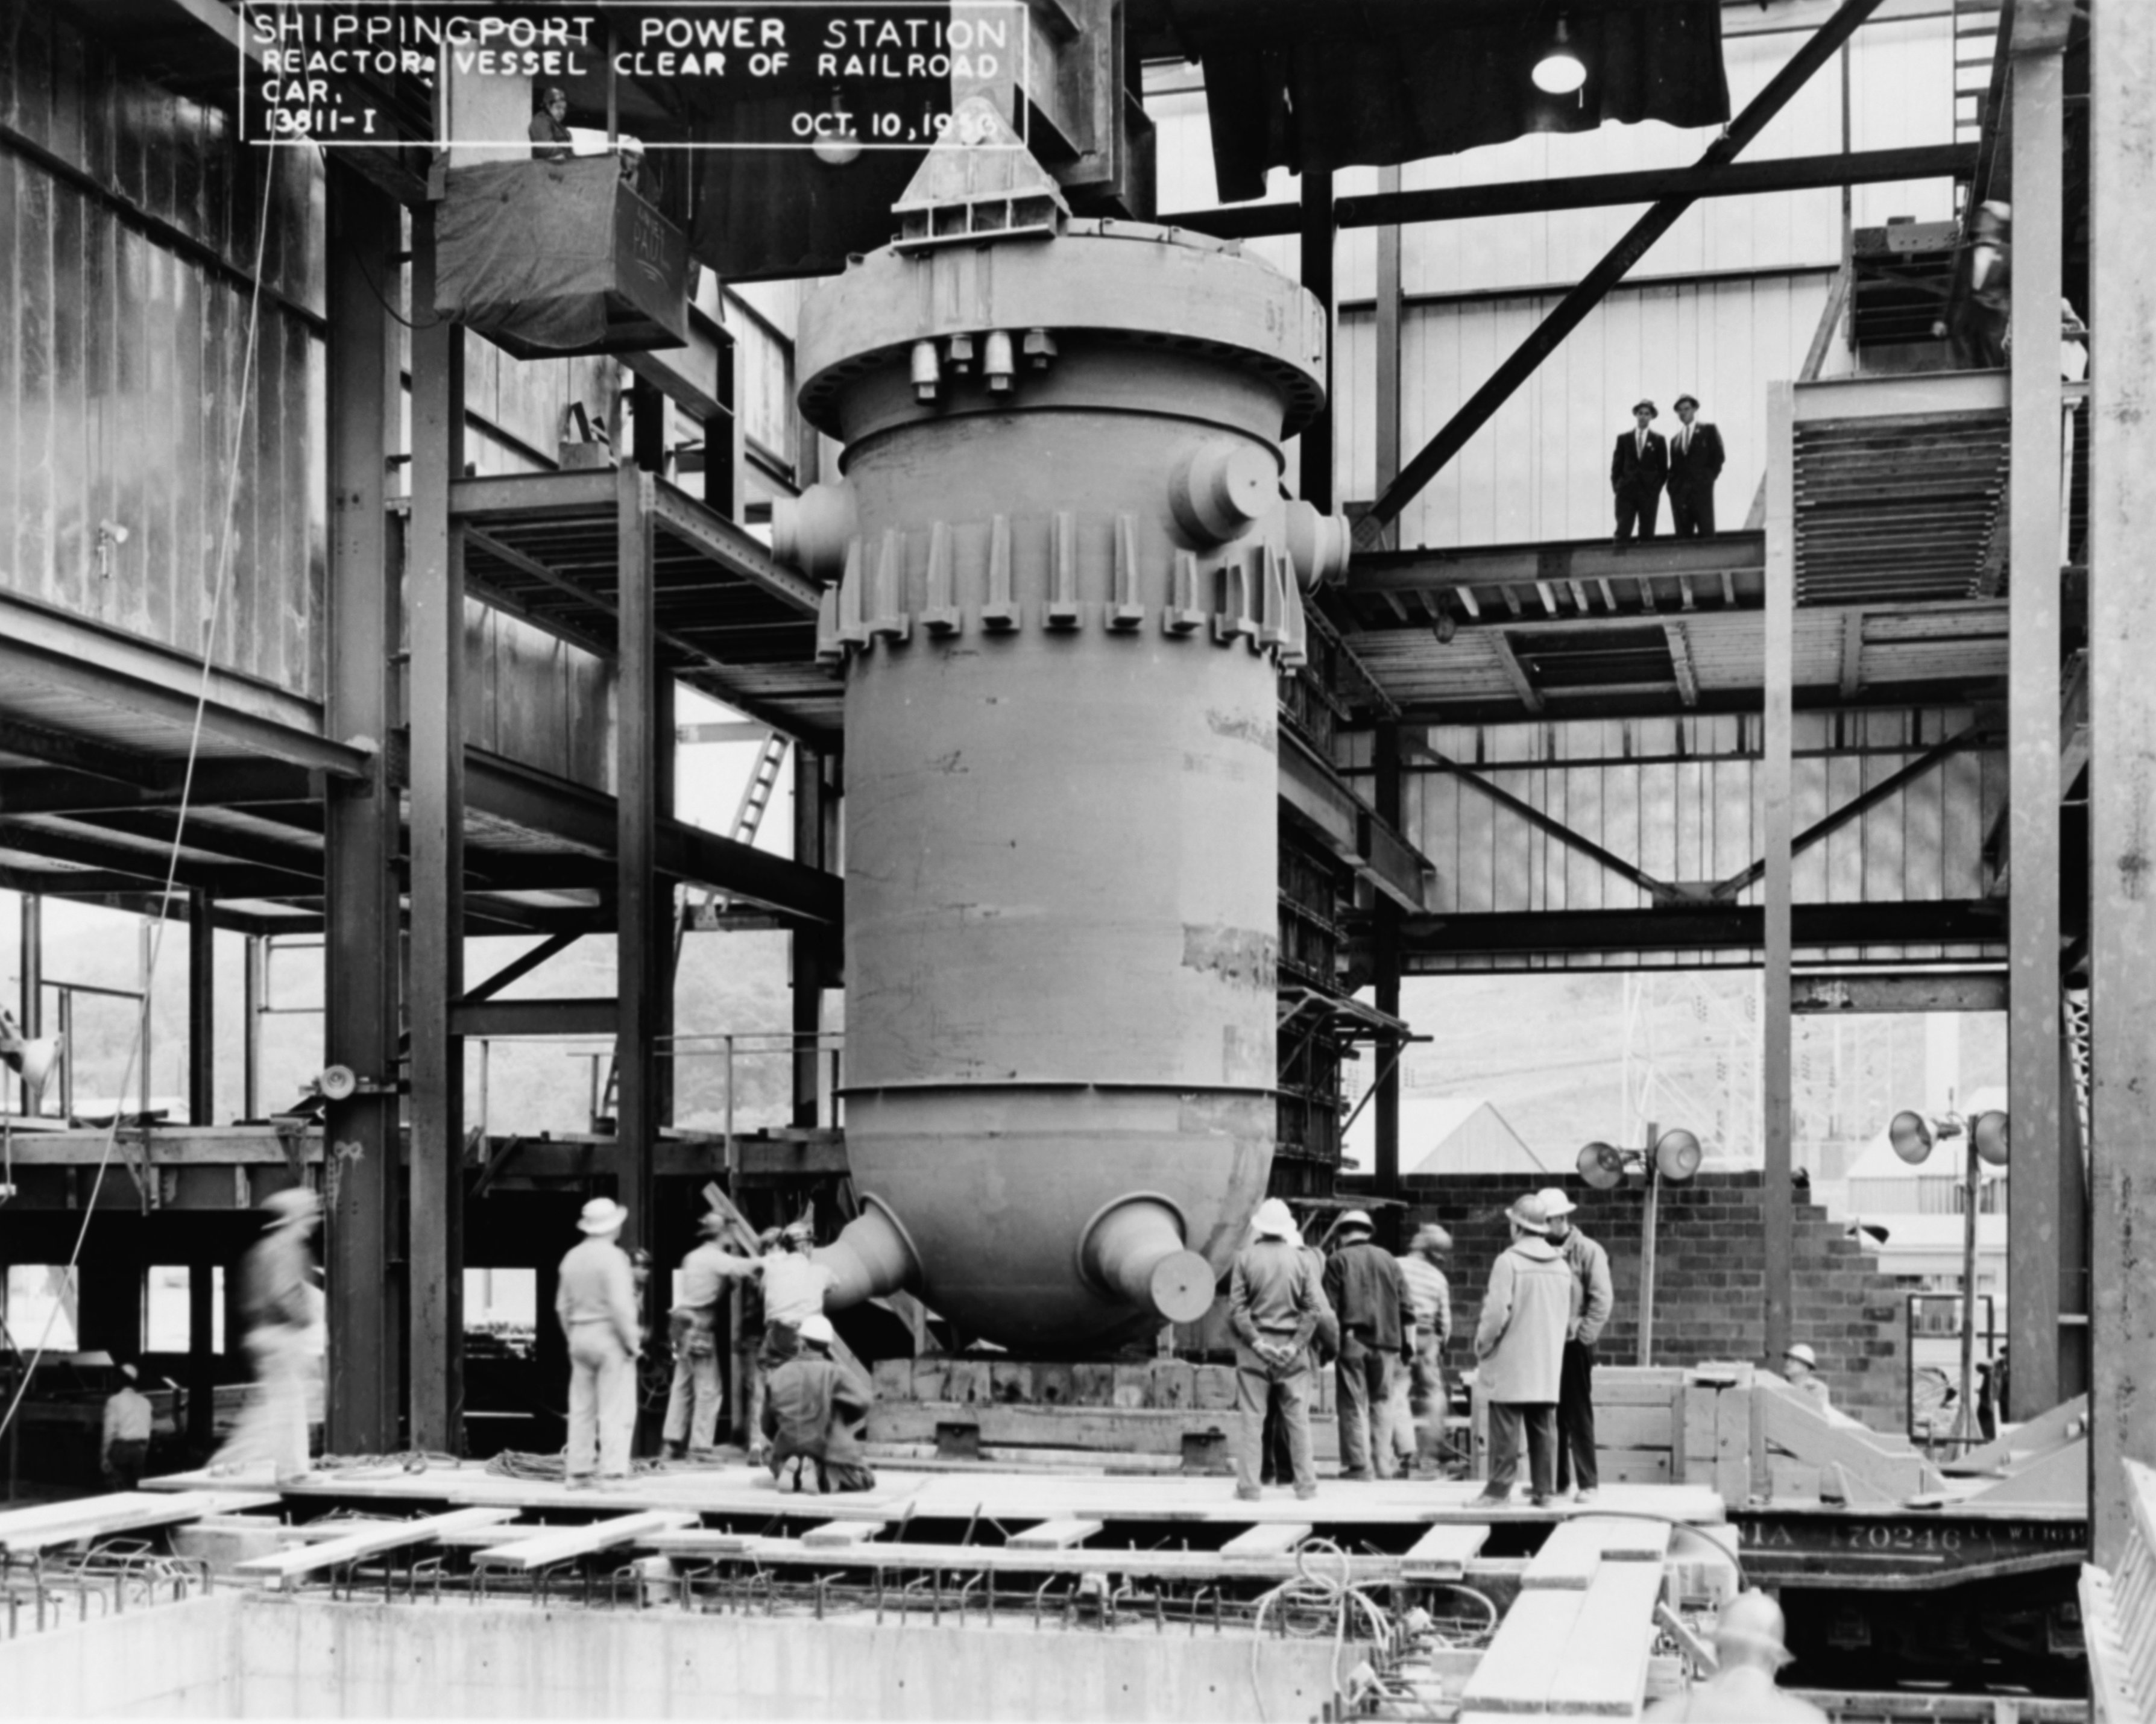 December 2, 1957 – Shippingport Atomic Power Station Becomes the World’s First Atomic Electric Power Plant Devoted Exclusively to Peacetime Uses